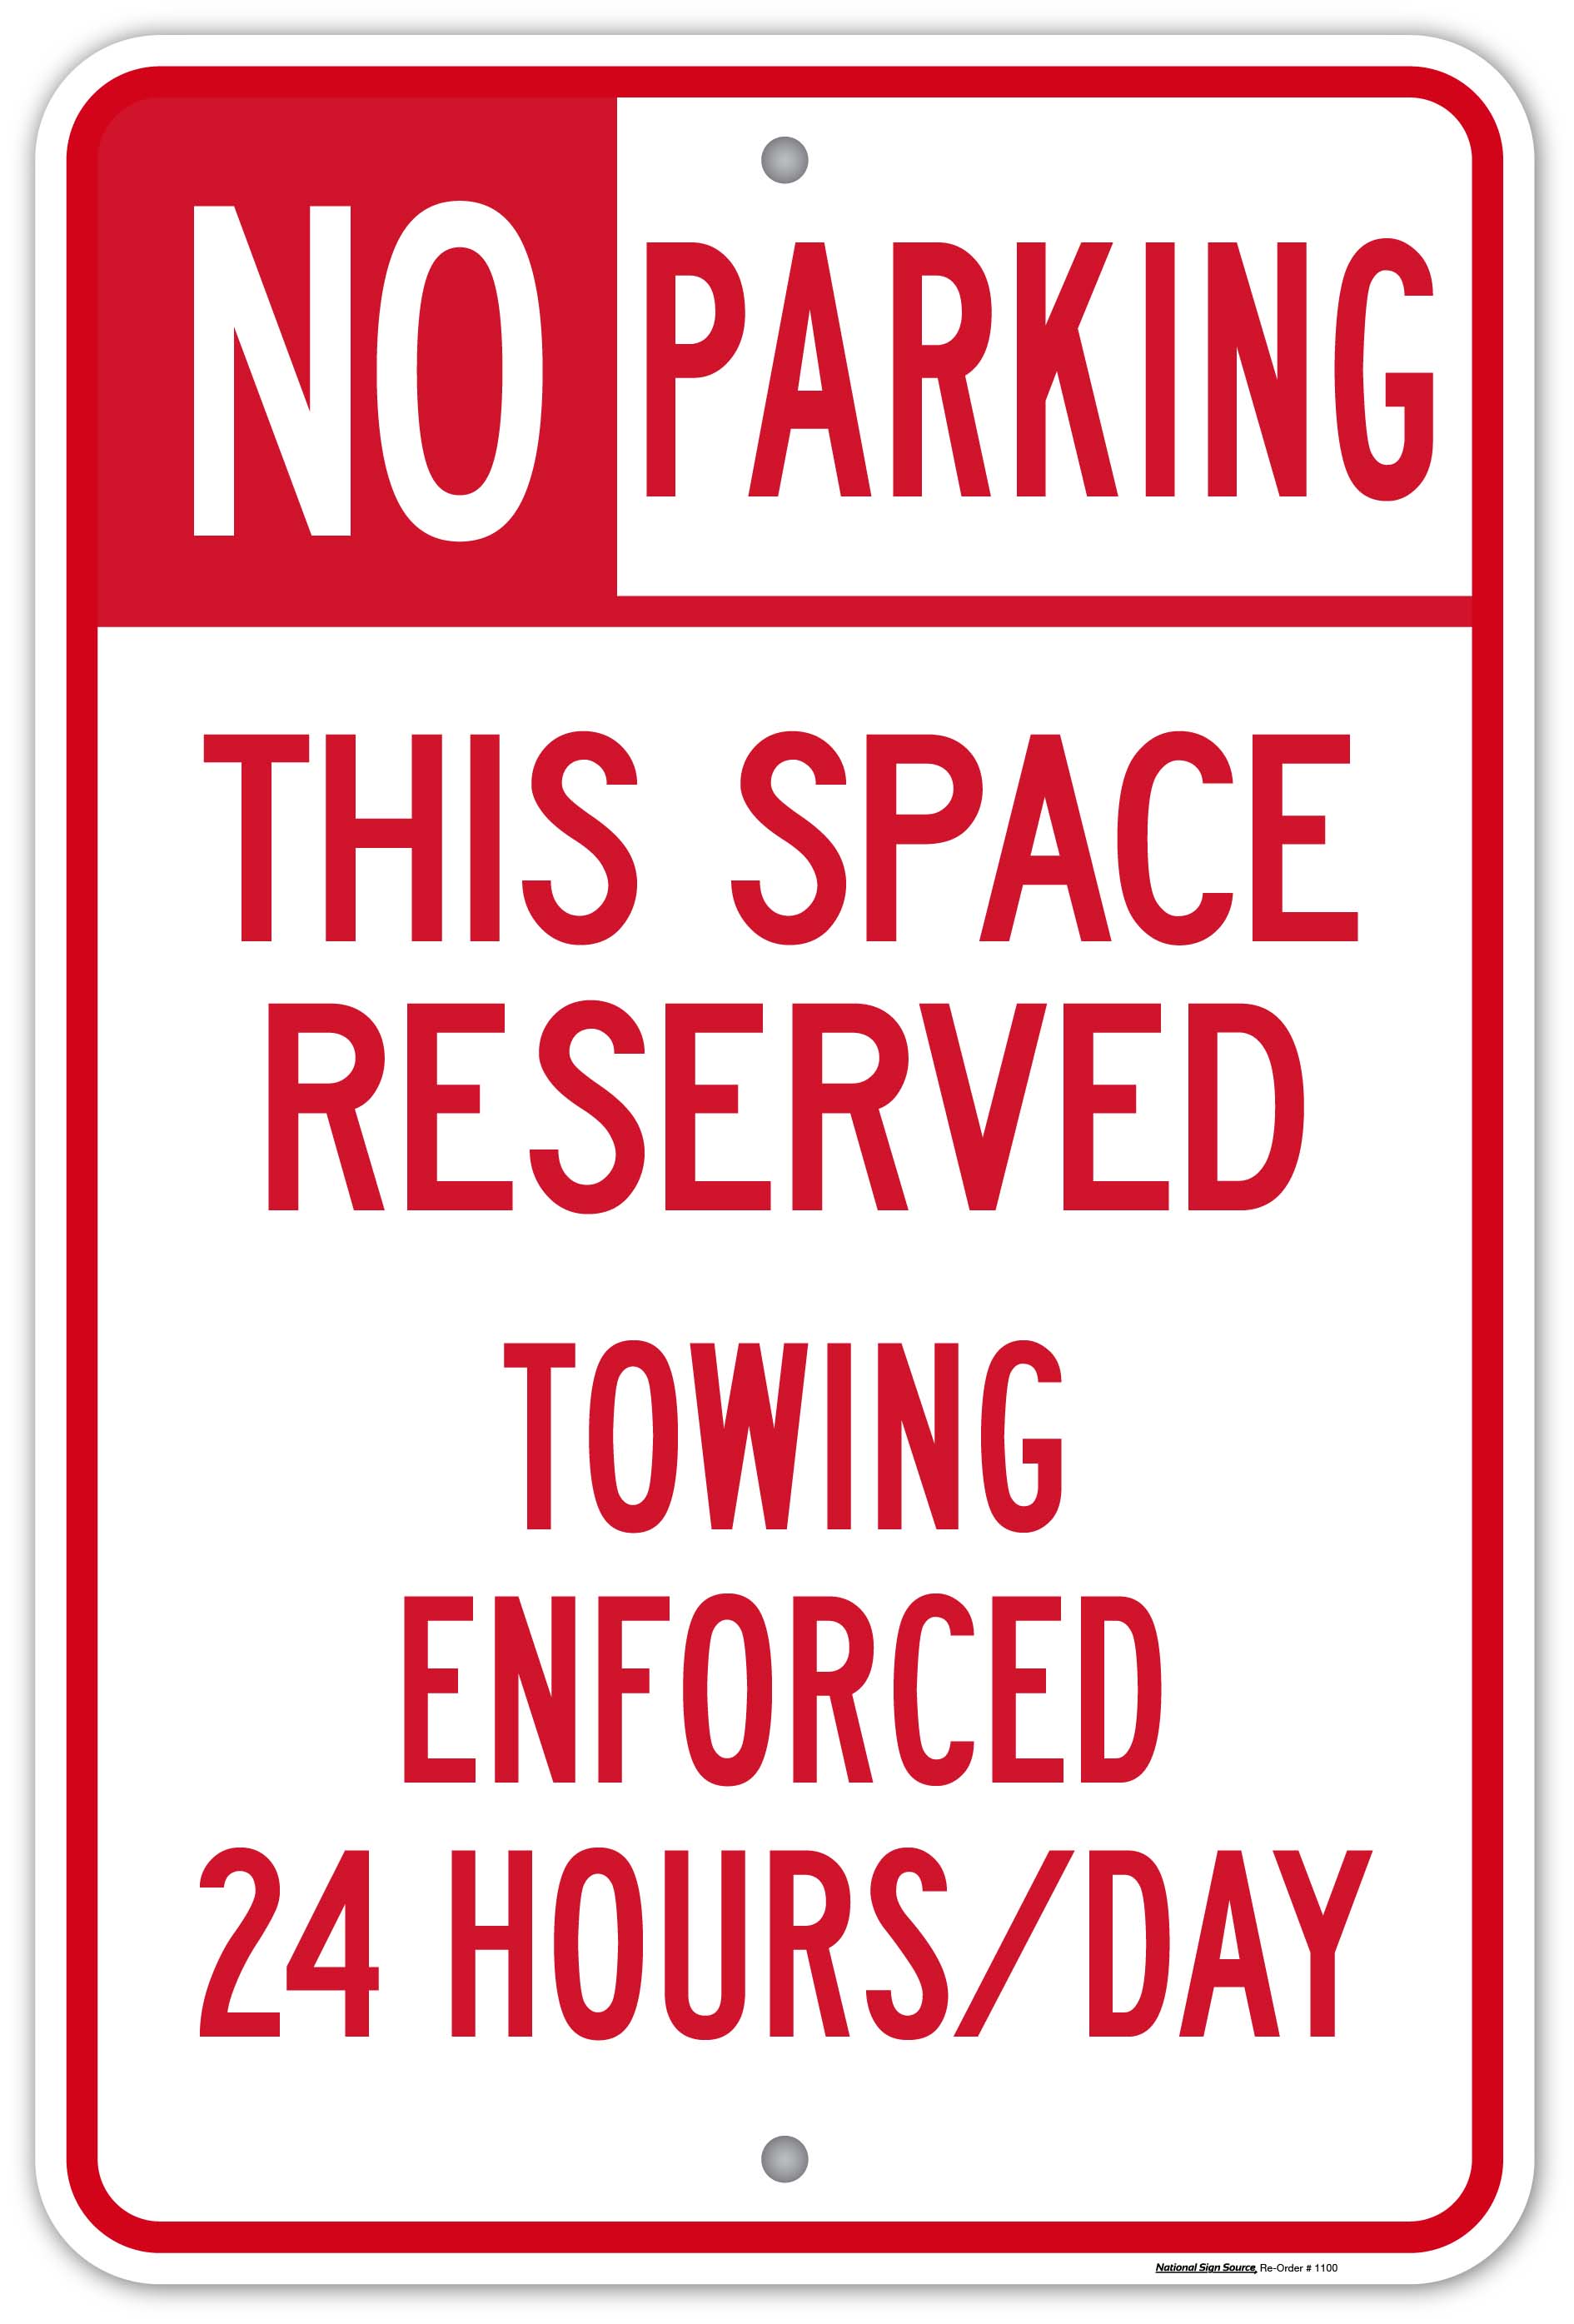 Dibond and Aluminum No Parking Towing Enforced 24 hours/day Sign - Manufactured by National Sign Source